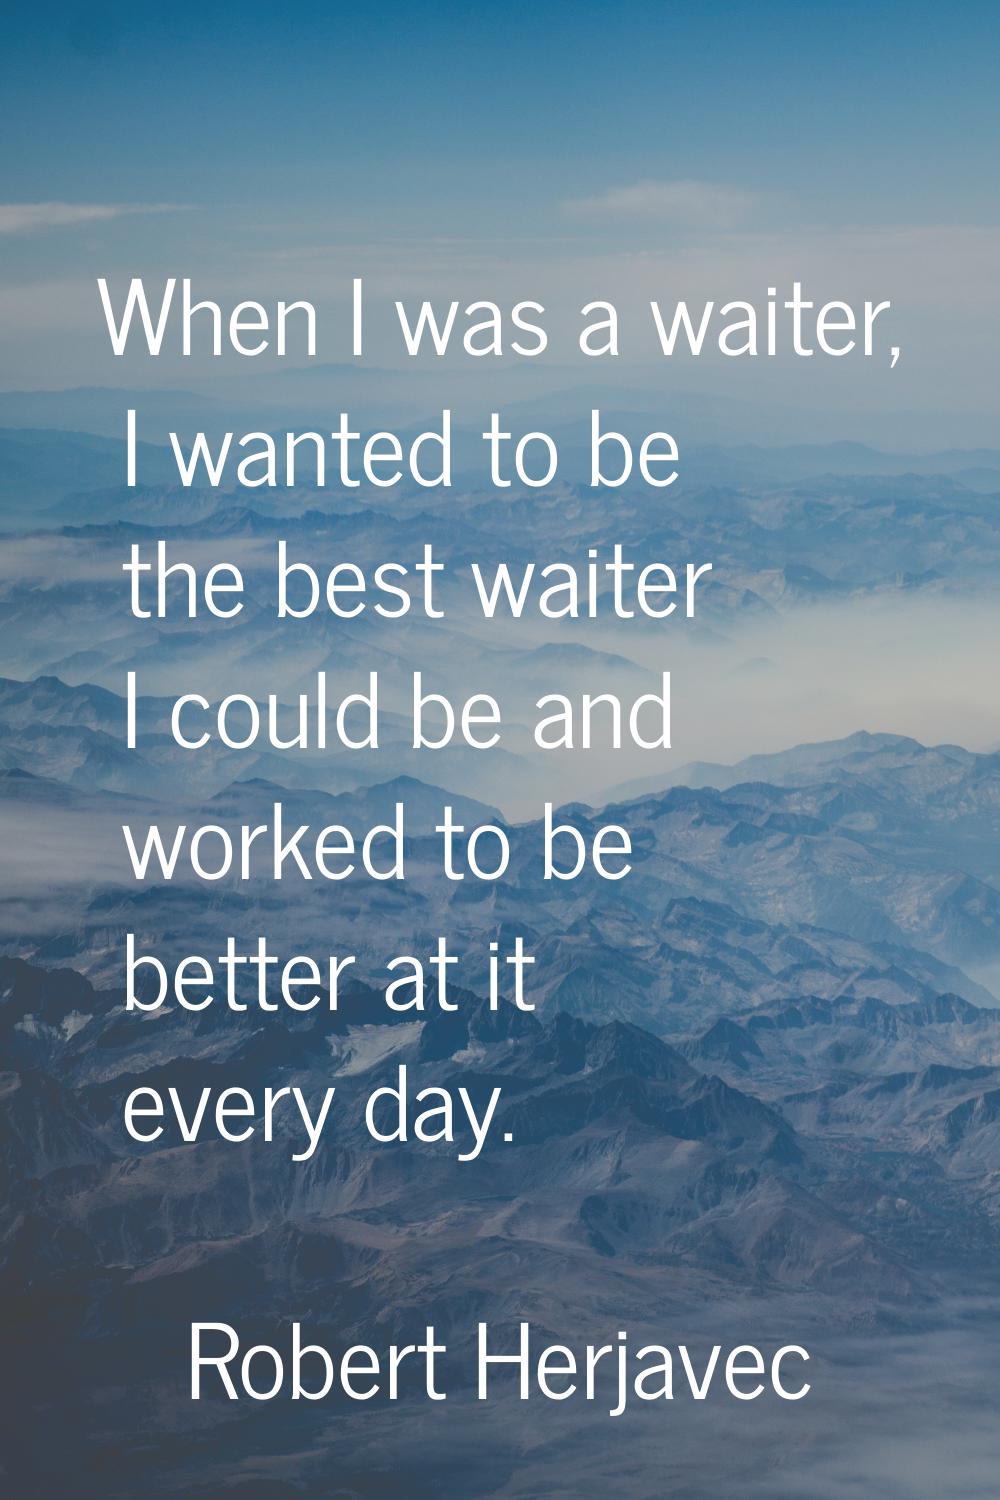 When I was a waiter, I wanted to be the best waiter I could be and worked to be better at it every 